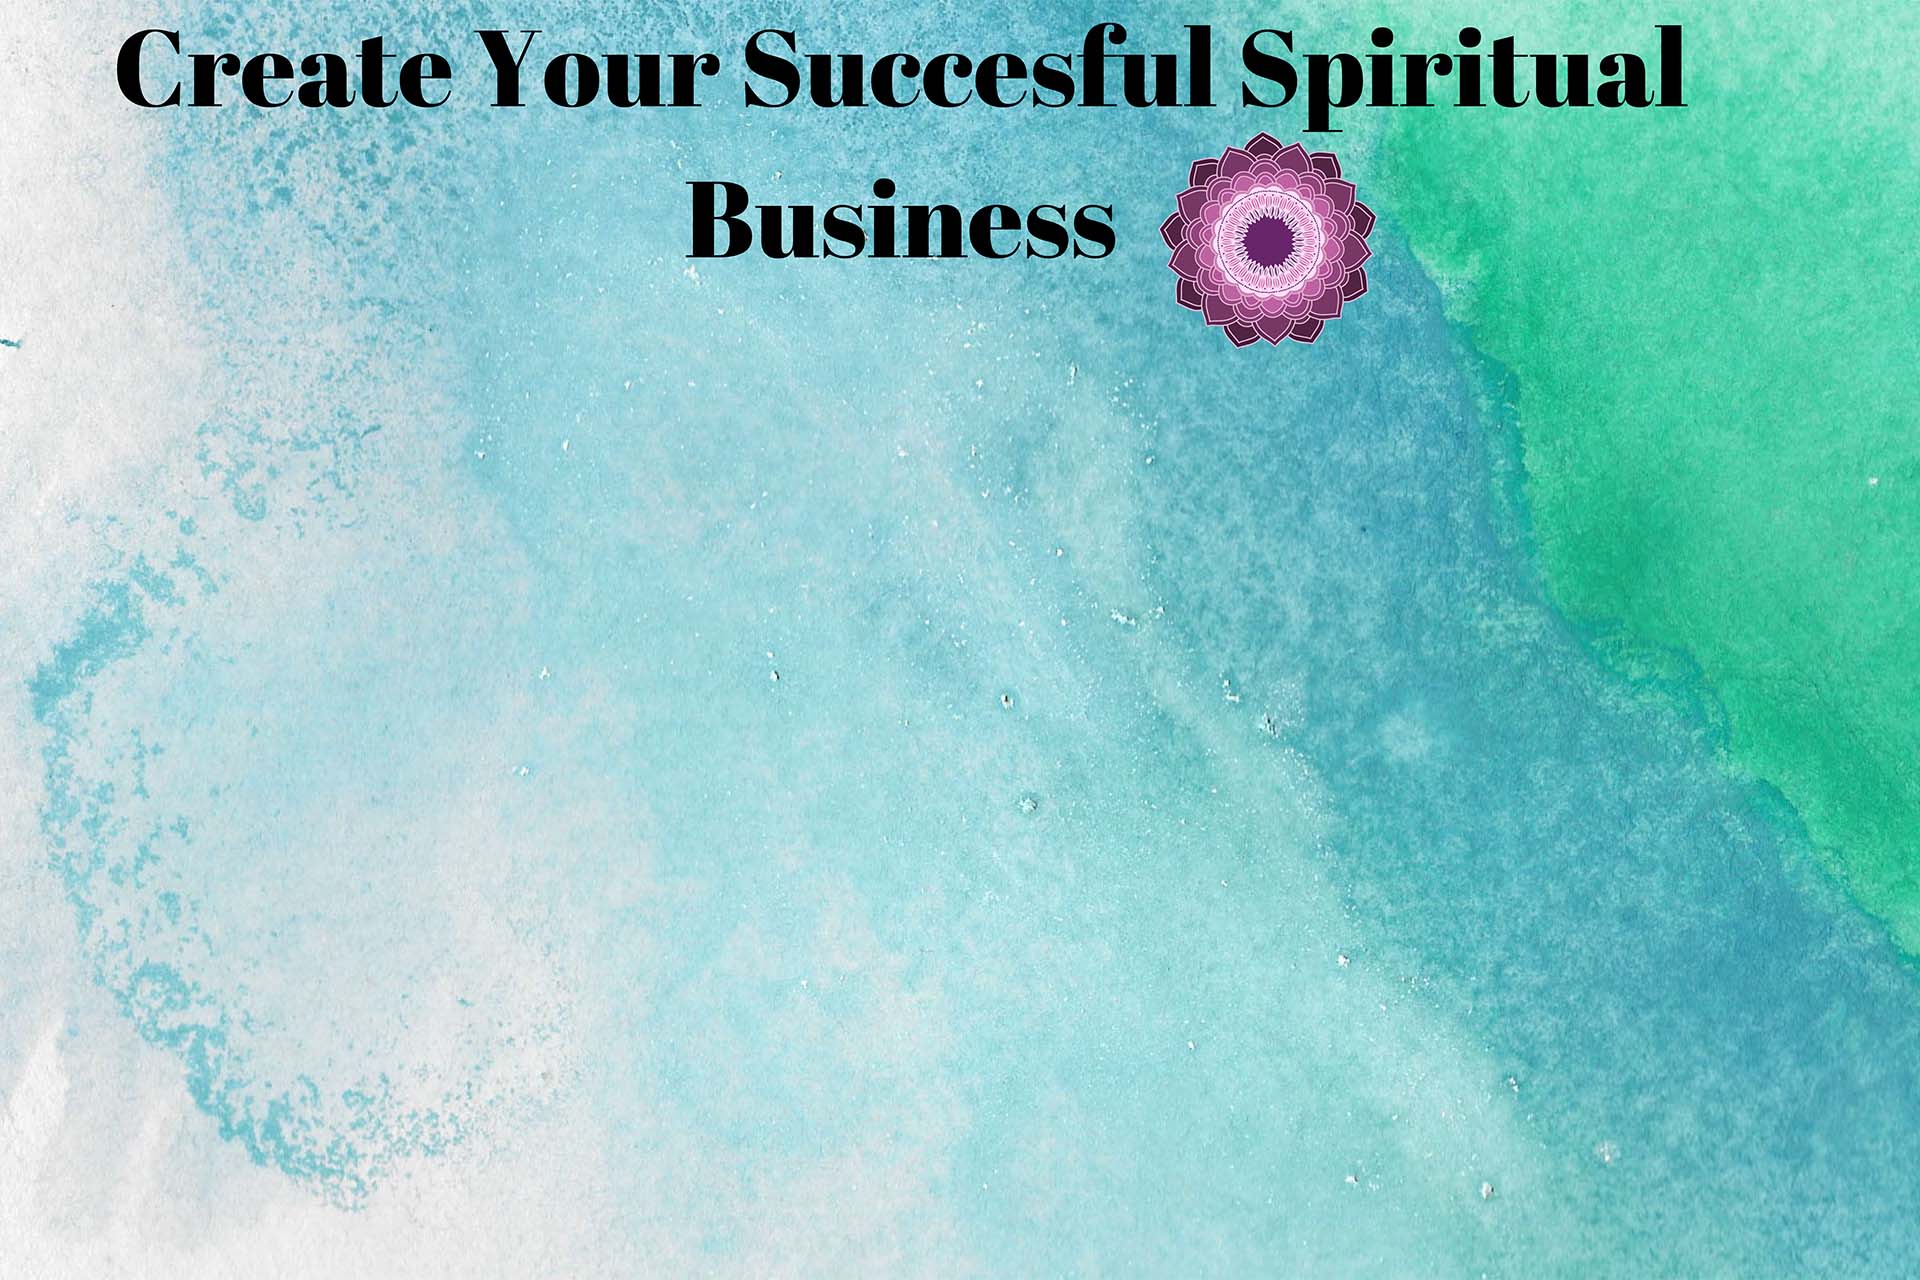 How to Create your Successful Spiritual Business